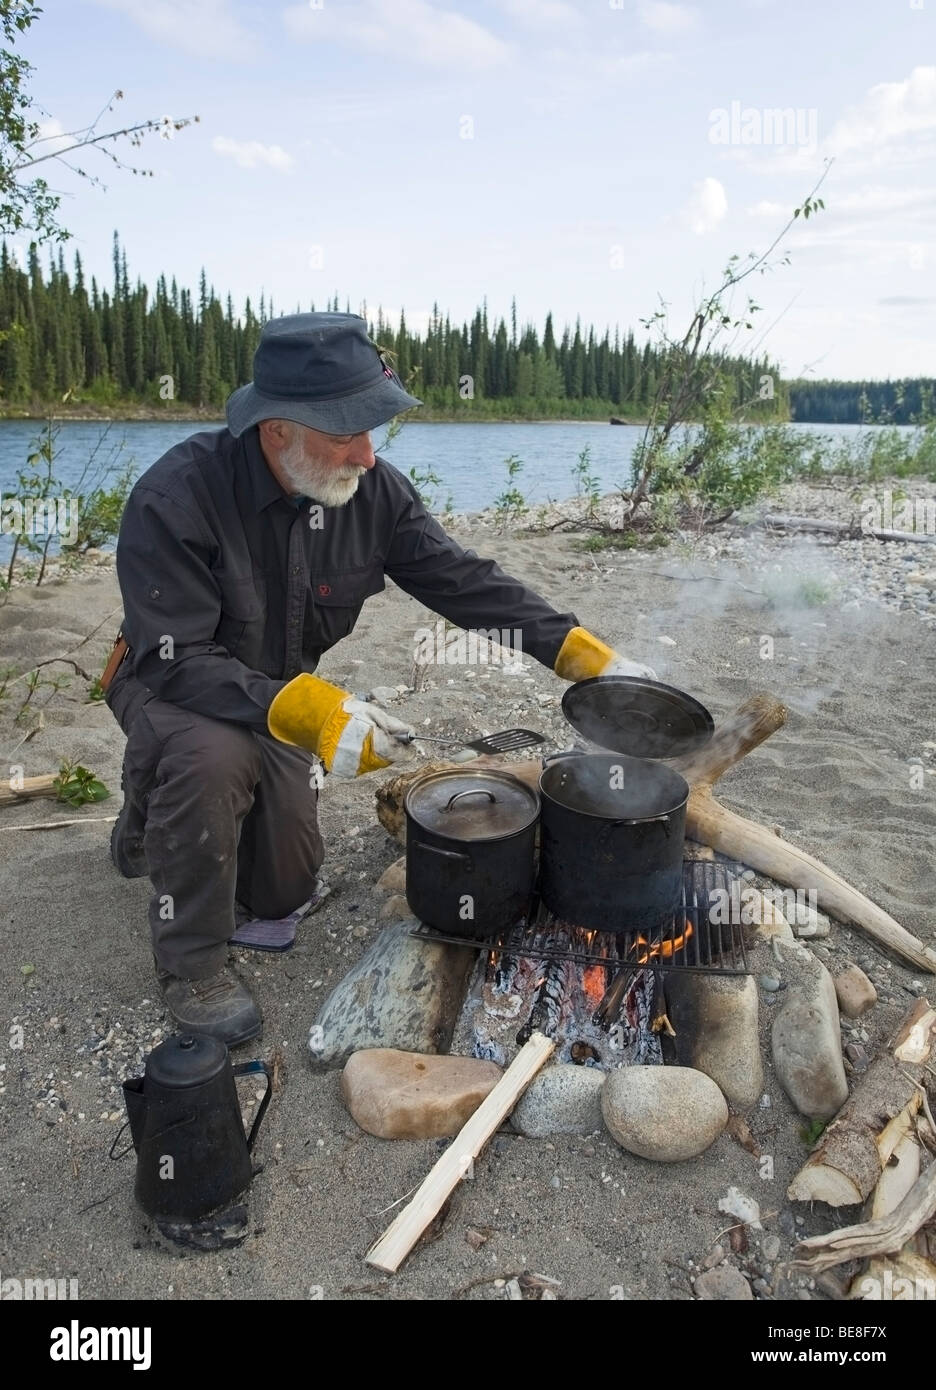 Man cooking on a camp fire, pots, kettle, upper Liard River, Yukon Territory, Canada Stock Photo